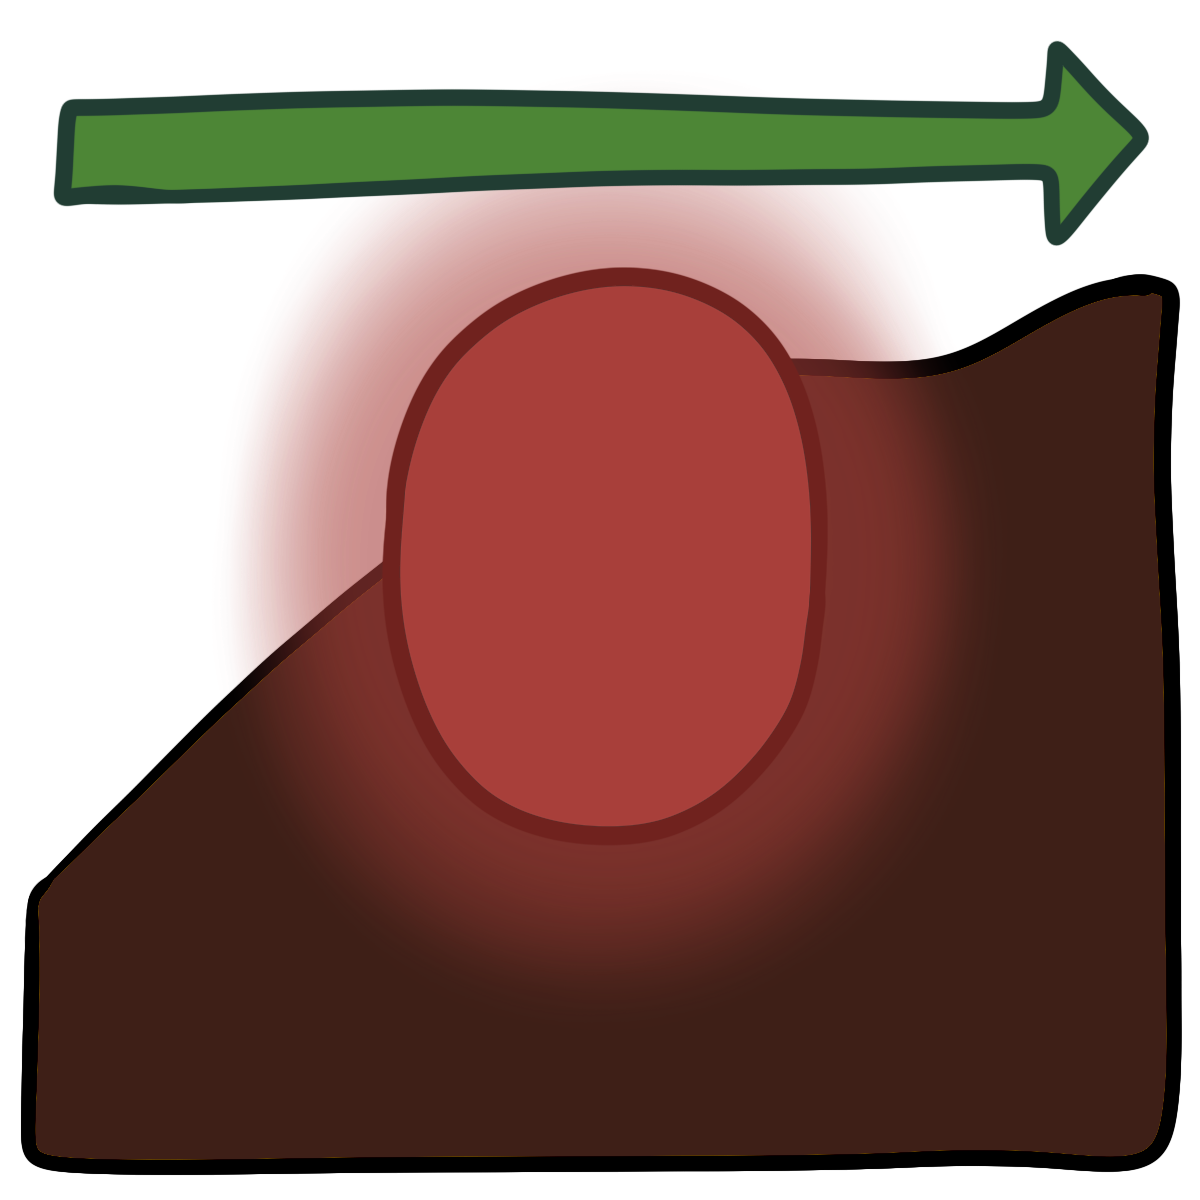 A thin green arrow pointing right above a glowing red oval. Curved dark brown skin fills the bottom half of the background.